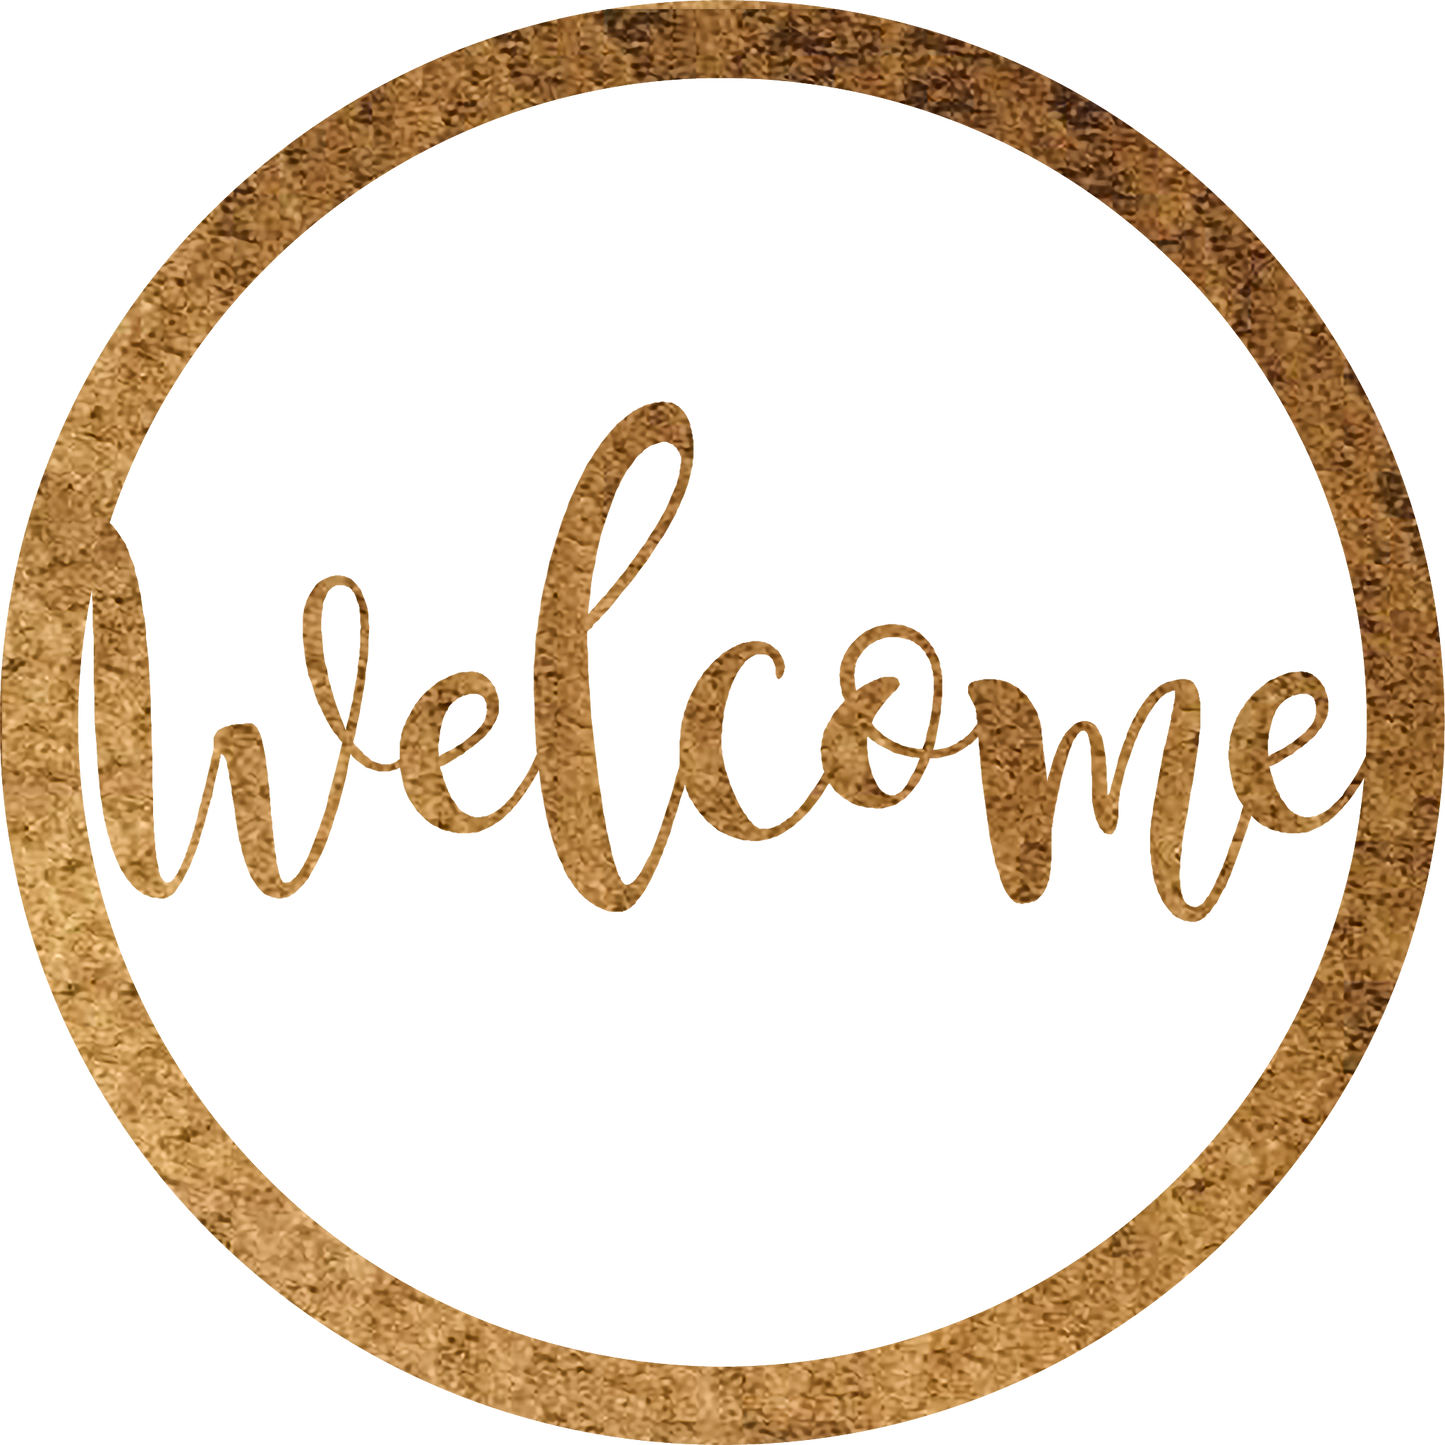 Welcome Round - Metal Wall Art